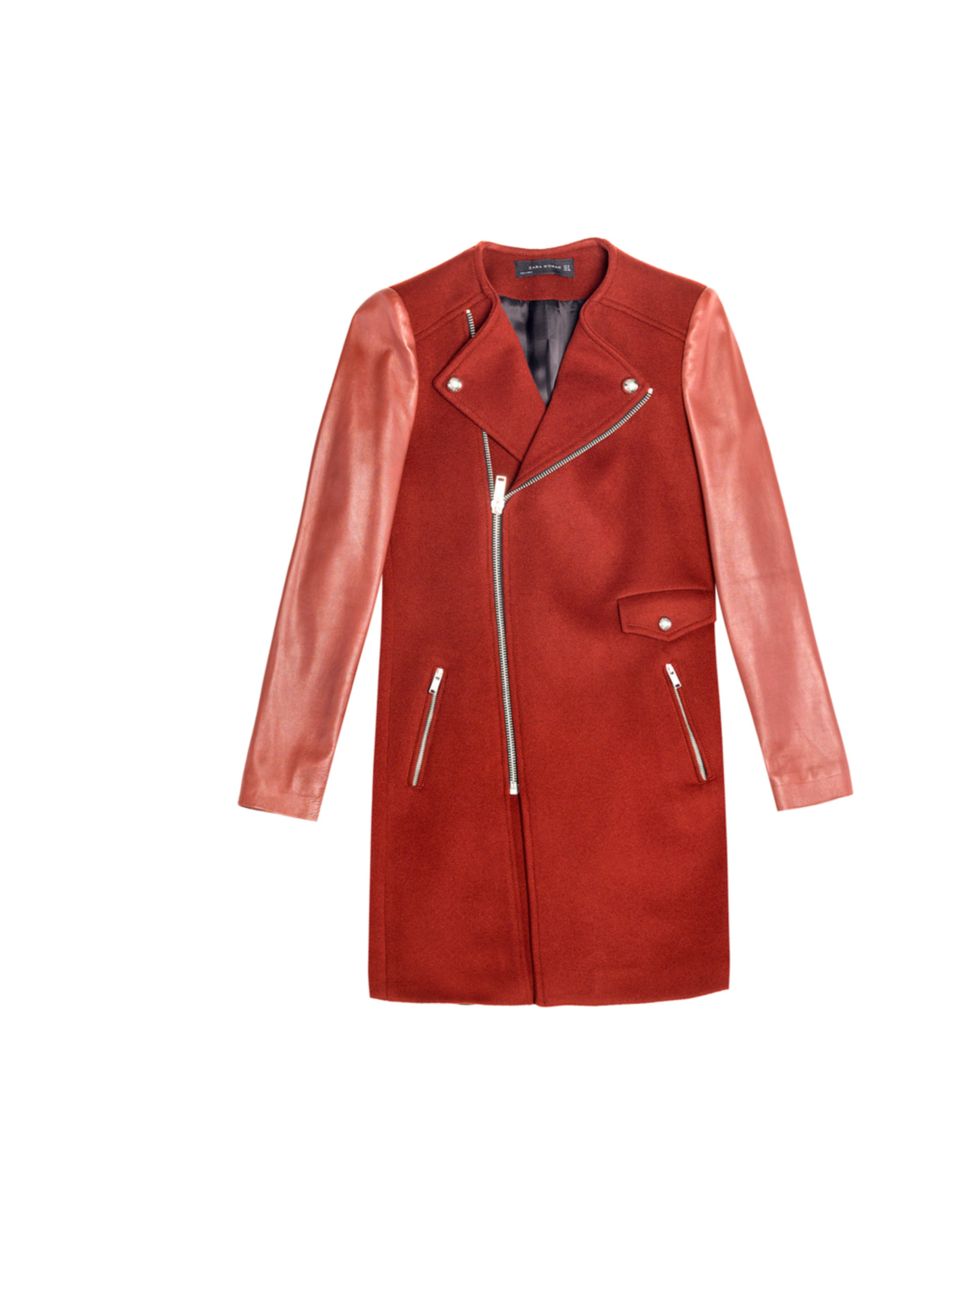 <p>Dont go for a boring black or grey, make a statement in winter with this red coat <a href="http://www.zara.com/webapp/wcs/stores/servlet/product/uk/en/zara-neu-W2012/269183/988010/BIKER%20COAT%20WITH%20ZIP">Zara</a> red coat with leather sleeves, £14